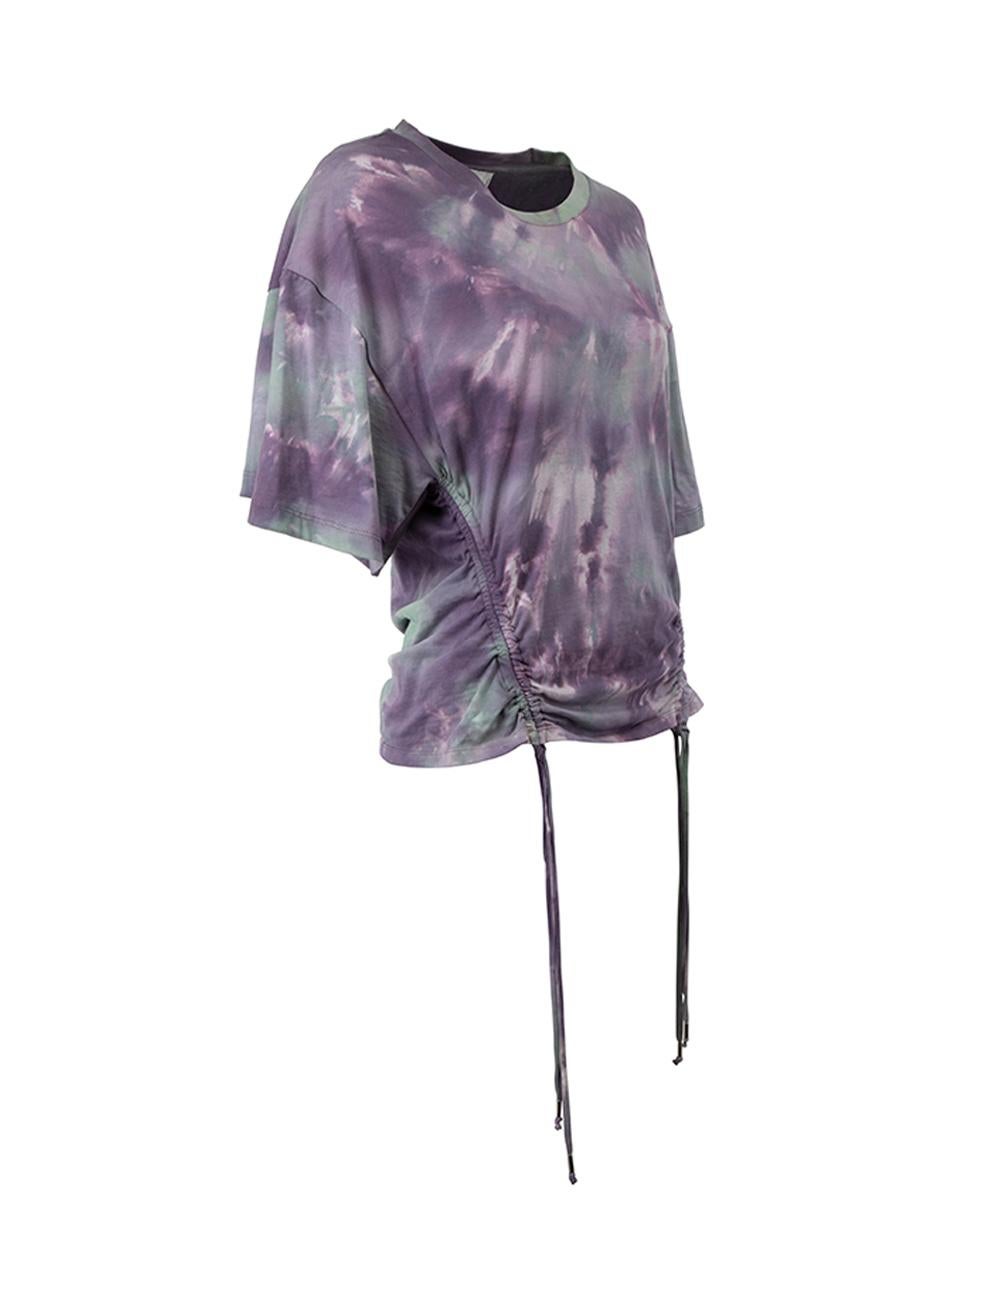 CONDITION is Very good. Minimal wear to t-shirt is evident. Minimal wear to the brand logo label on this used Iro designer resale item. 
 
 Details
  Purple
 Cotton
 Short sleeves T shirt
 Tie dye print
 Round neckline
 Side ruched detail with